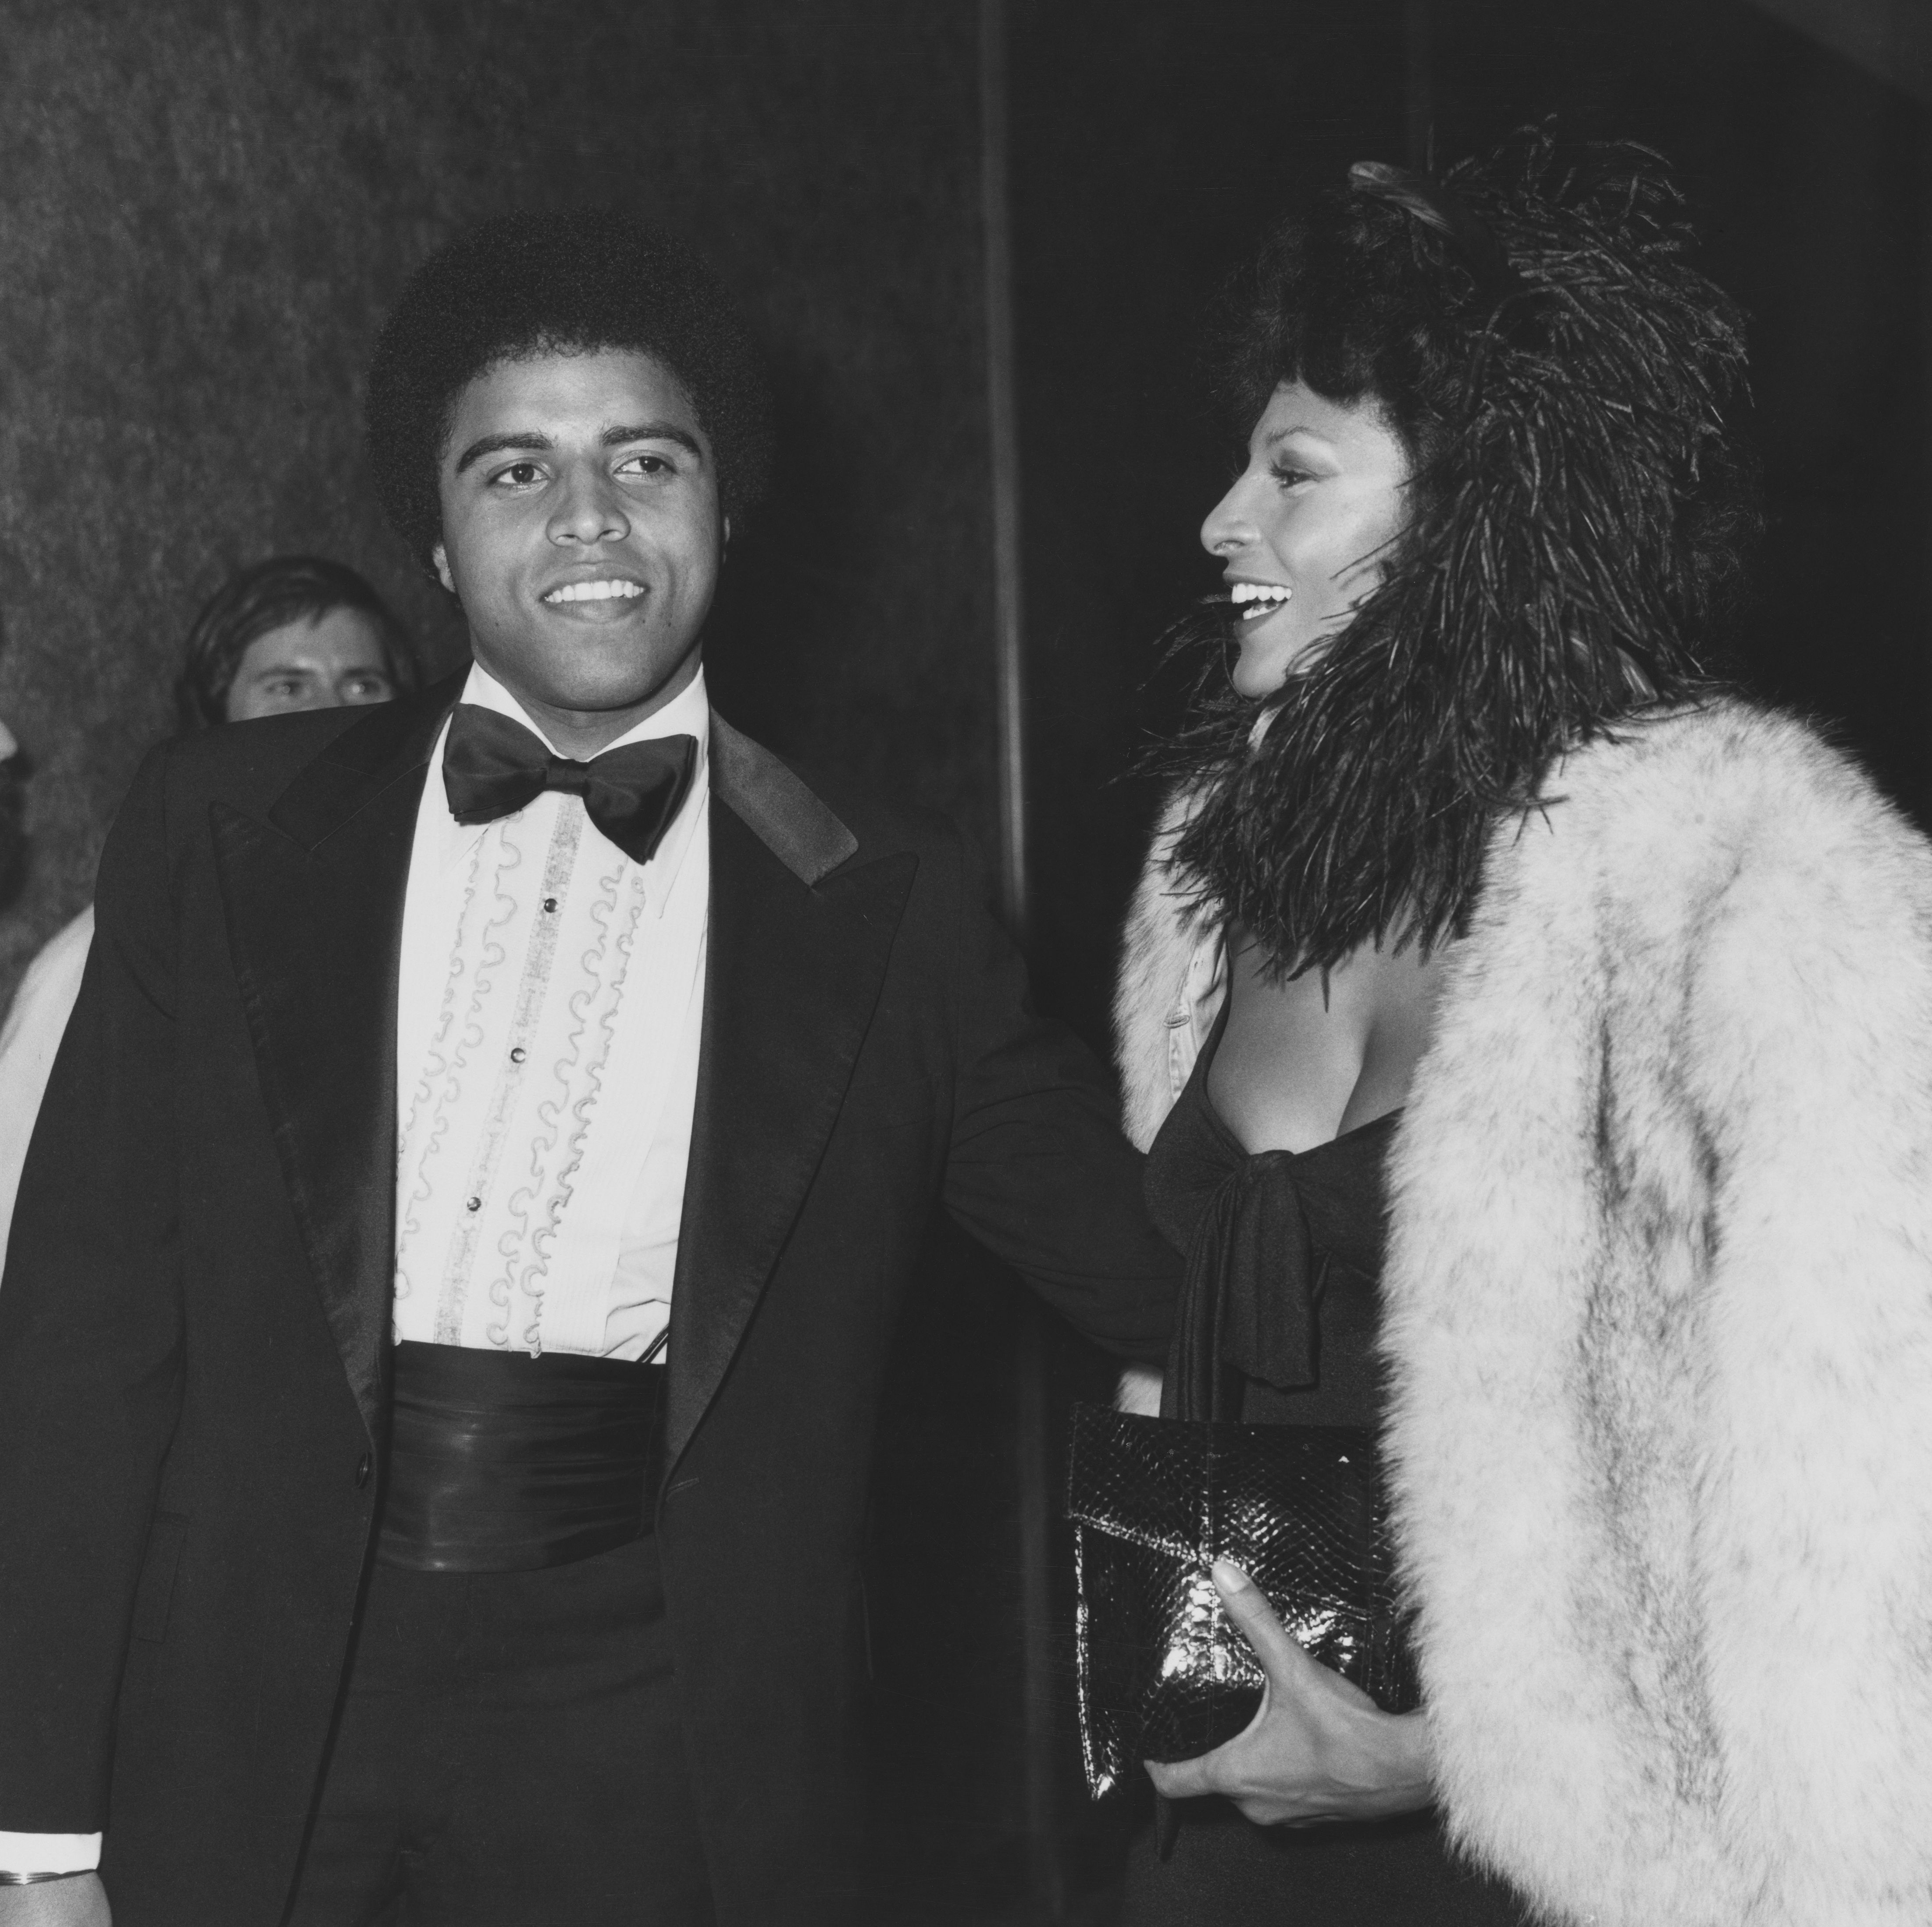 American actor Rodney Grier and his sister, American actress and singer Pam Grier attend the 7th NAACP (National Association for the Advancement of Colored People) Image Awards, held at the Hollywood Palladium in Los Angeles, California, 19th January 1974. 